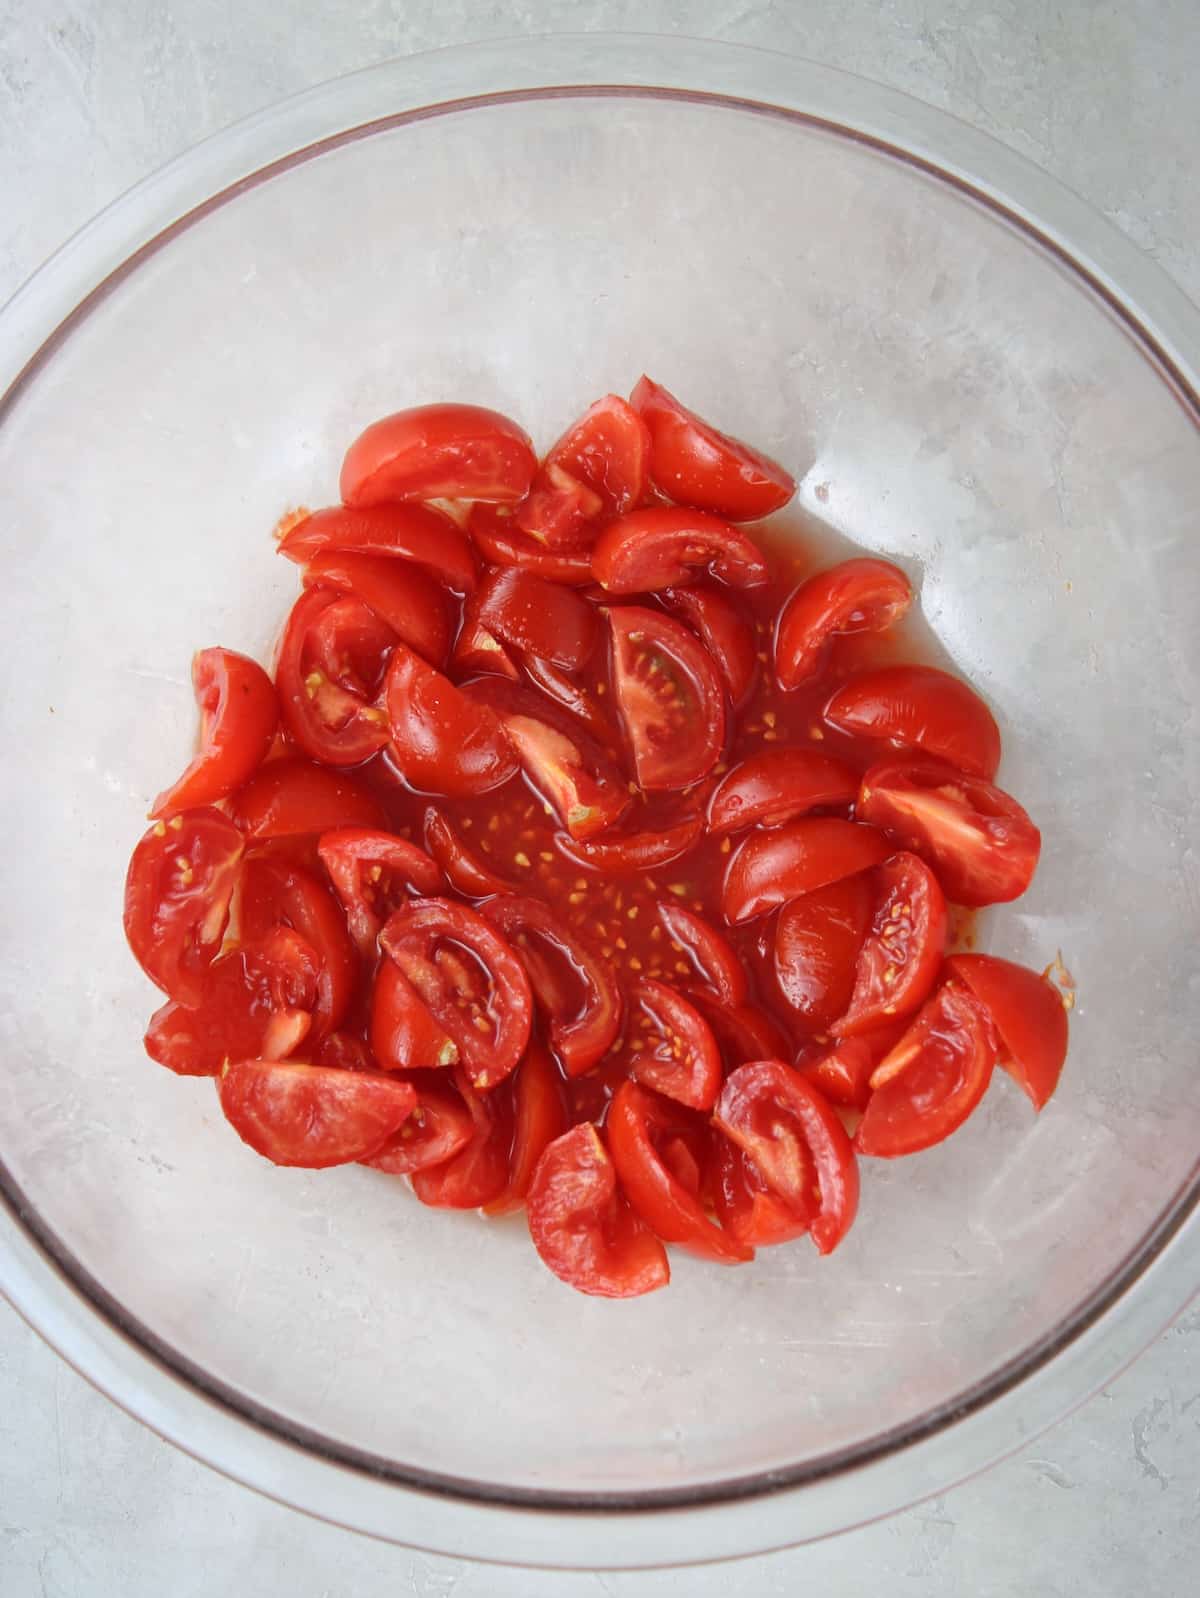 Cut up tomatoes sprinkled with salt in a large bowl.